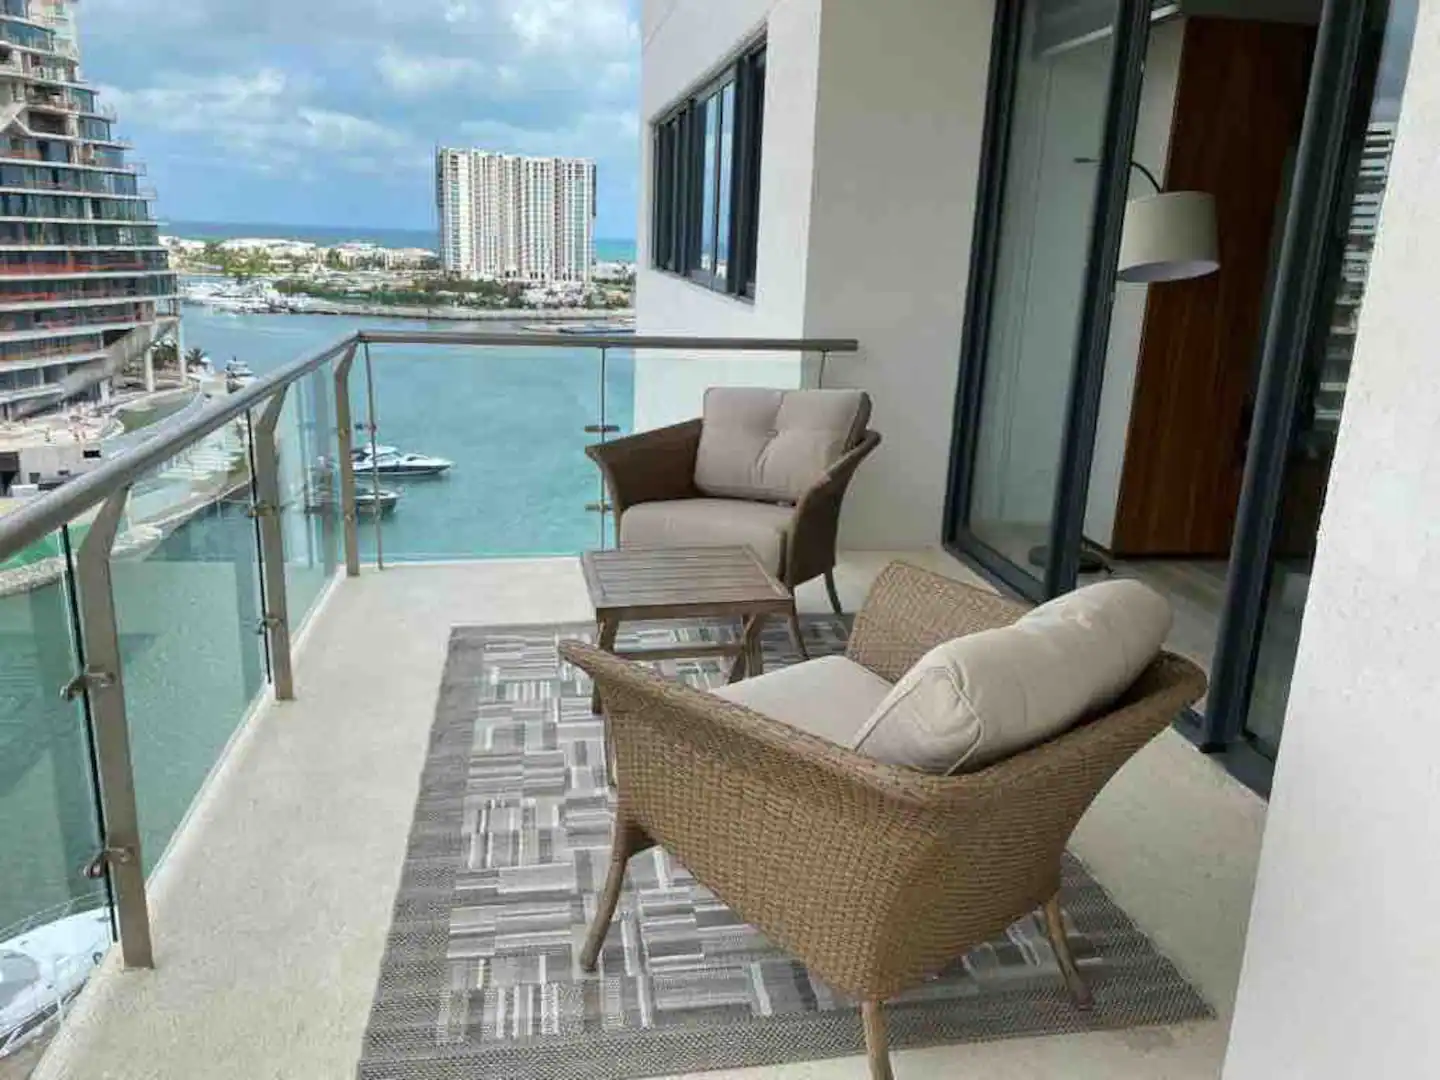 Seafront Ocean View Apartment, a top pick for the best Cancun Airbnbs